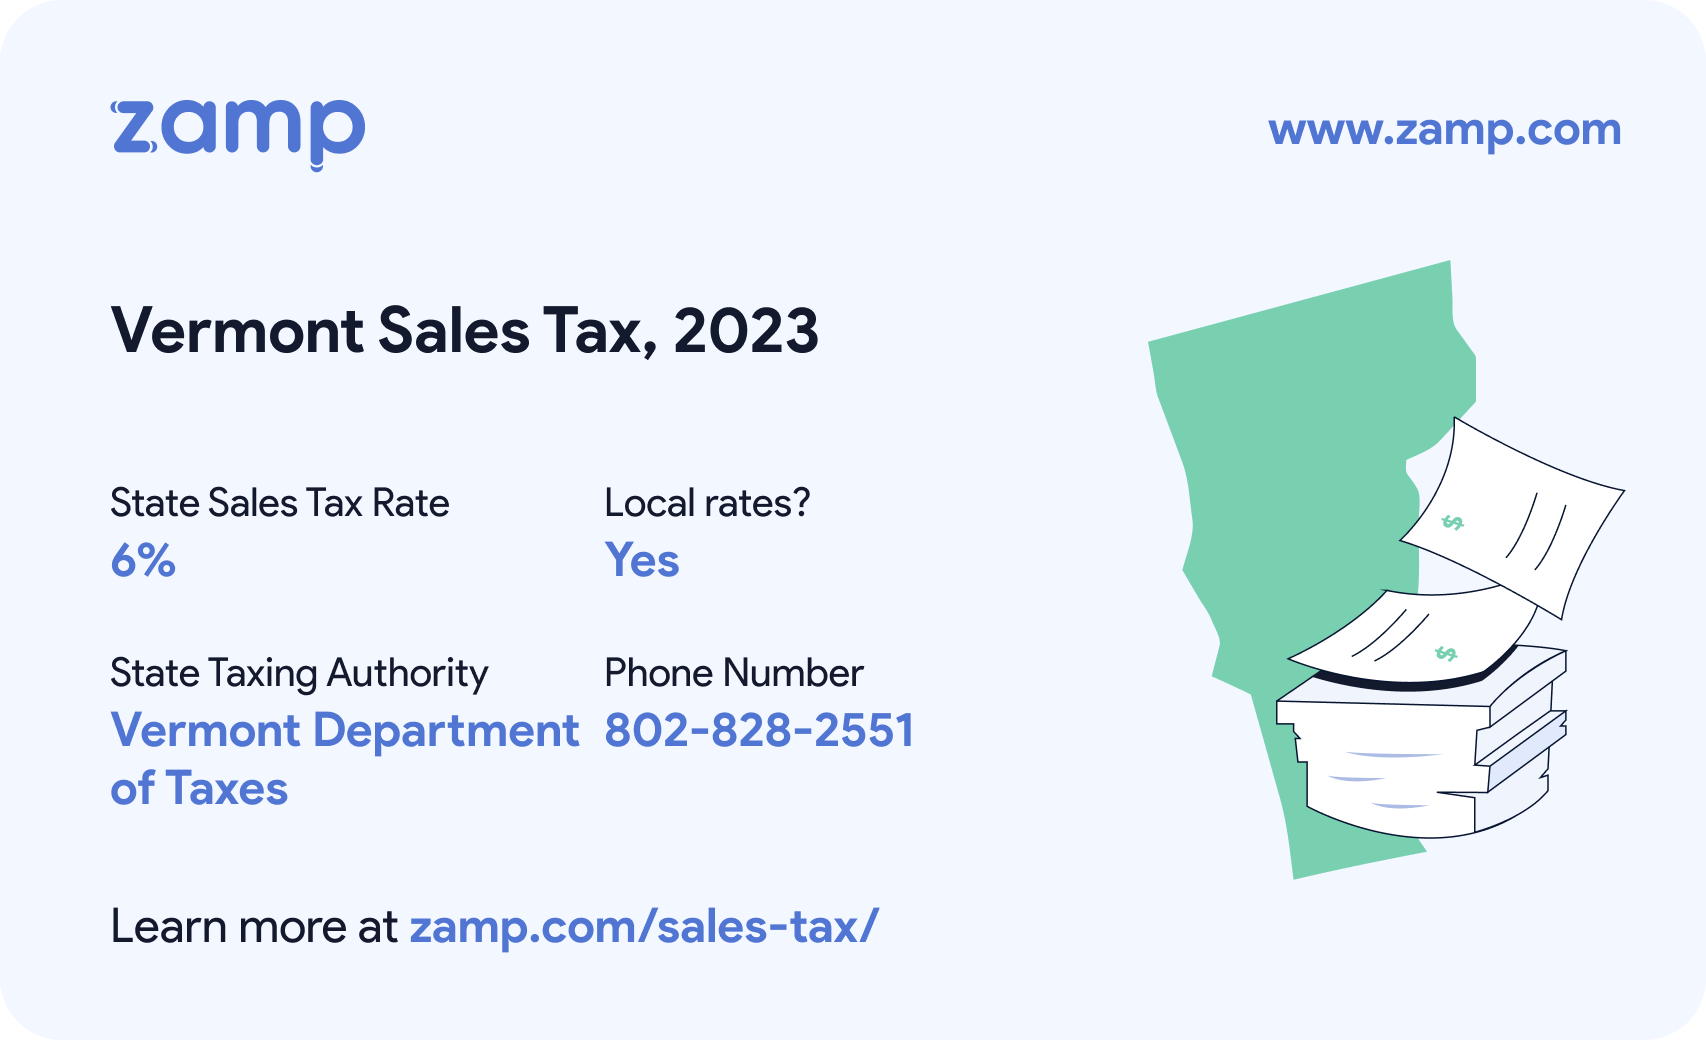 Vermont basic sales tax info for 2023 - State sales tax rate: 6%, Local rates? Yes; State Taxing Authority: Vermont Department of Taxes; and phone number 802-828-2551